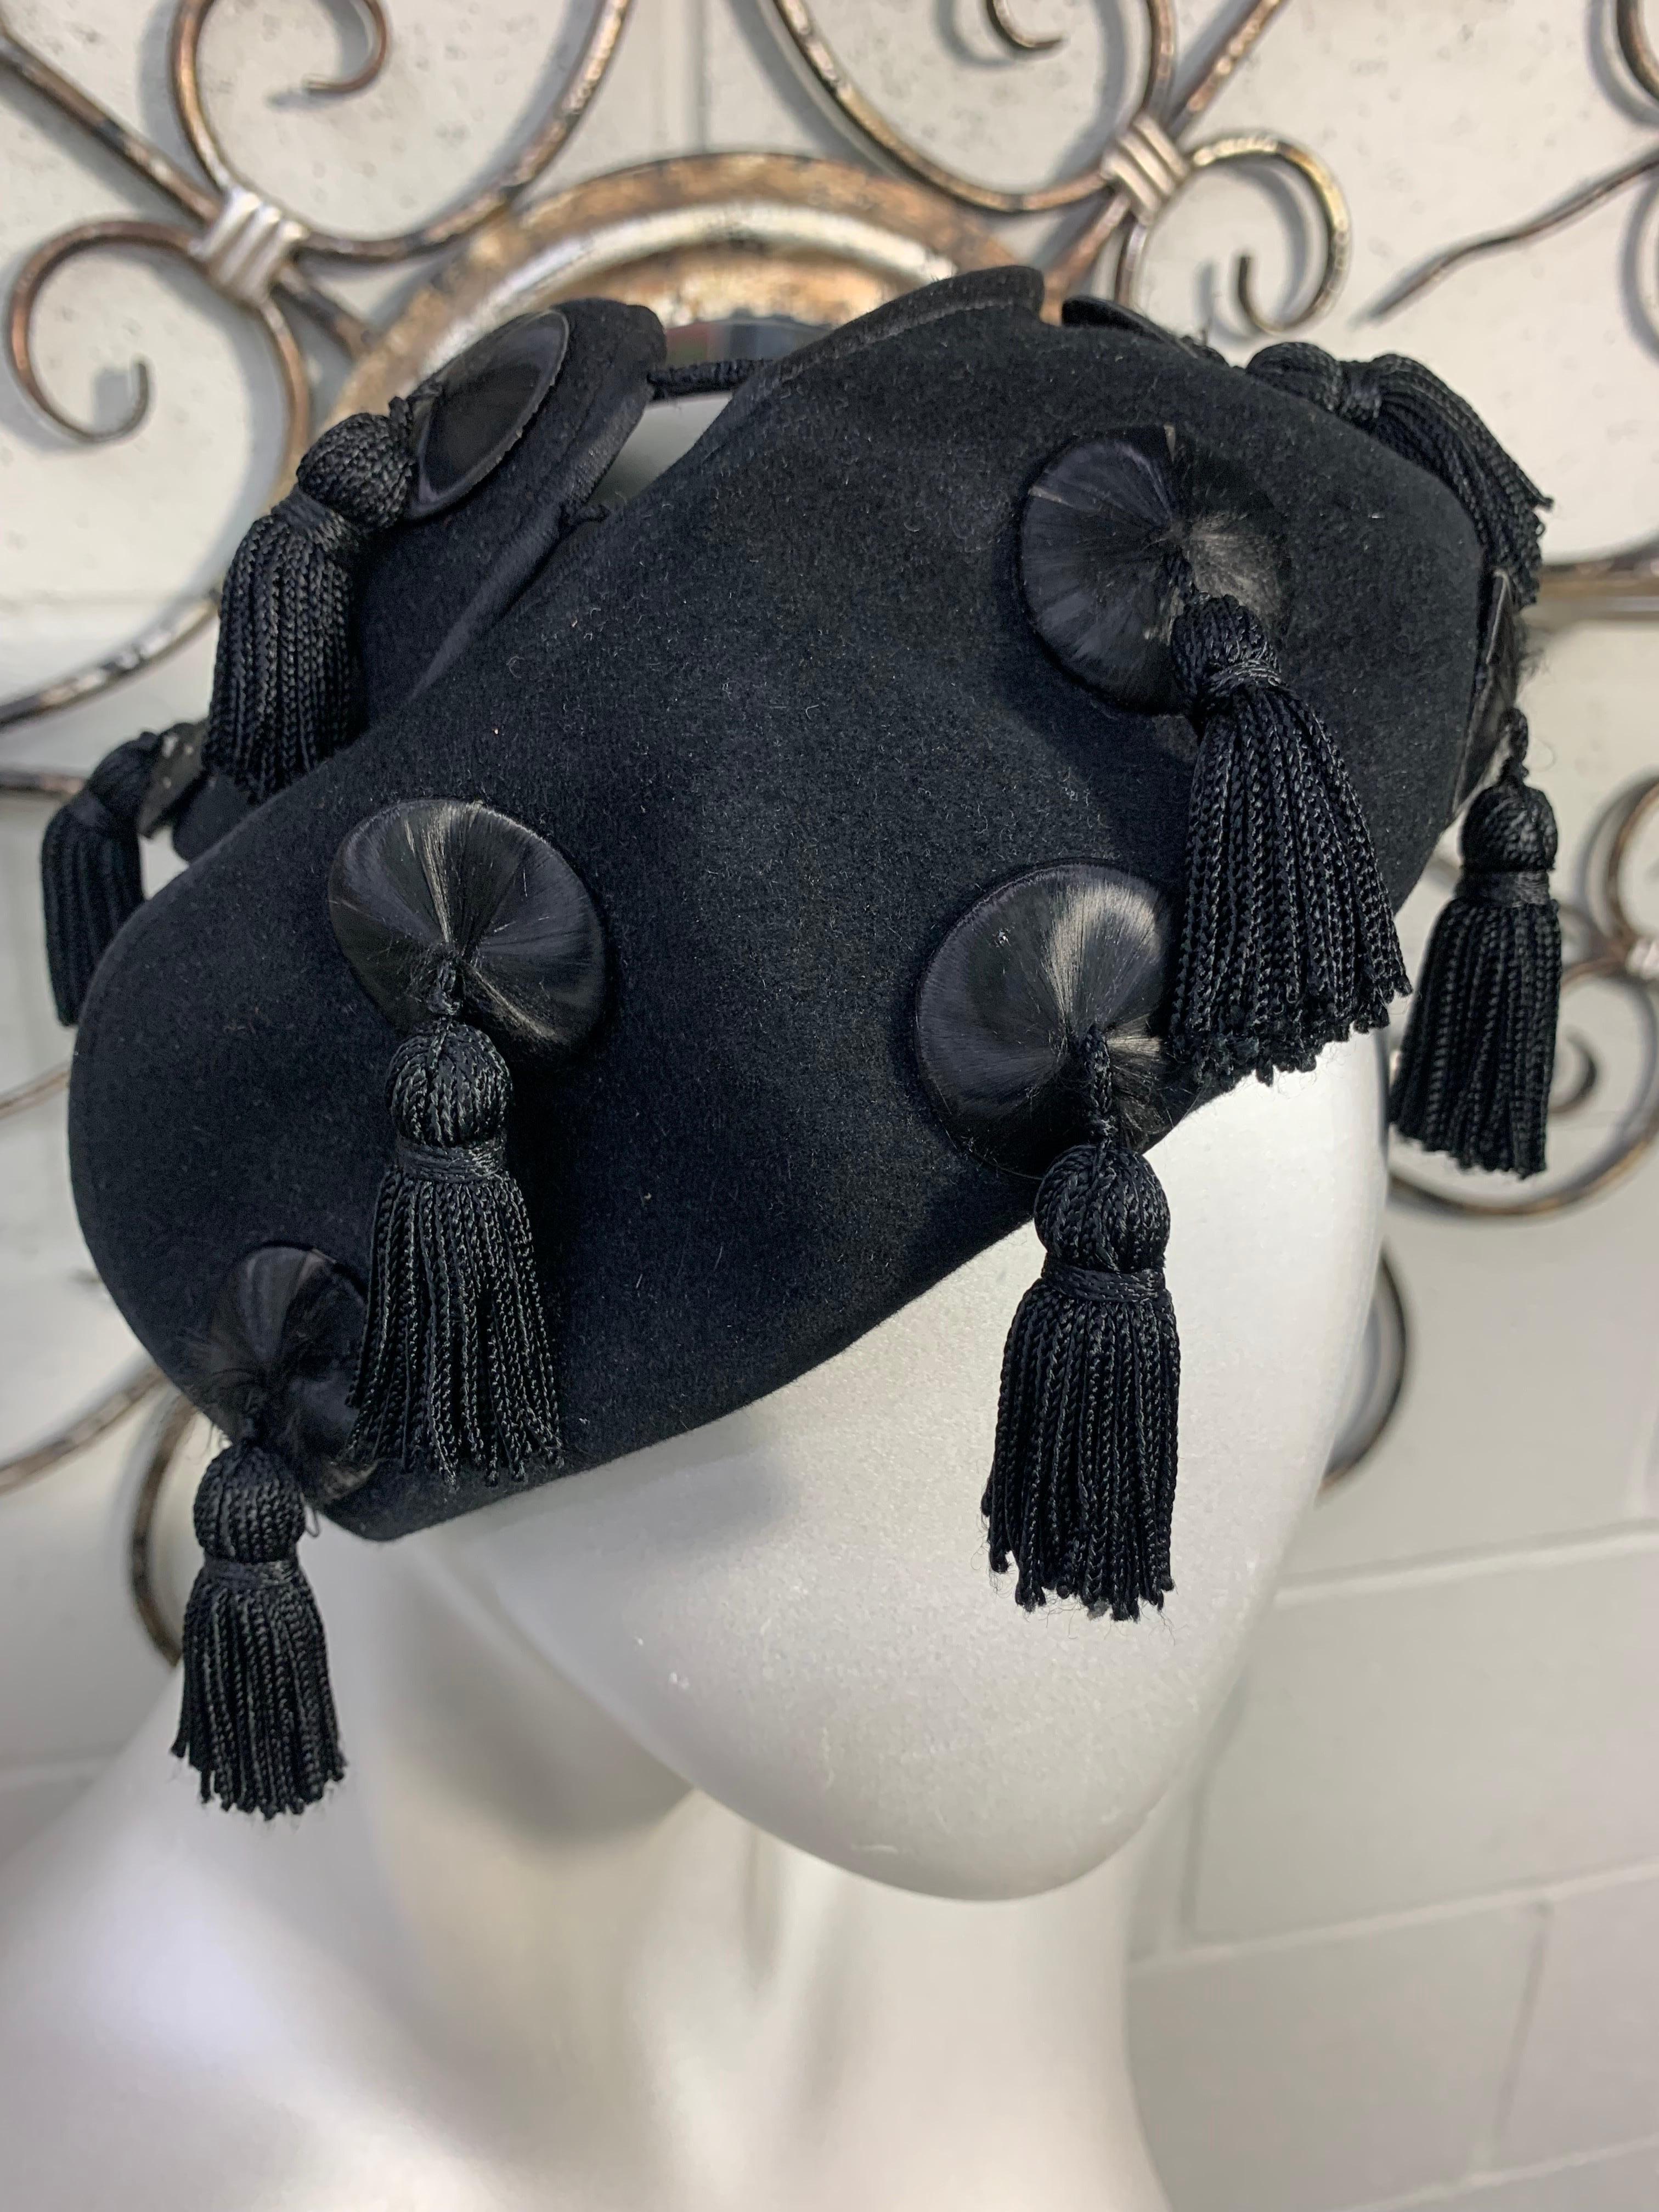 A fabulous 1940s Caspar-Davis black wool open-crown hat with all-over silk-flossed buttons and tassels providing captivating movement at every turn and gesture. Size Medium. 